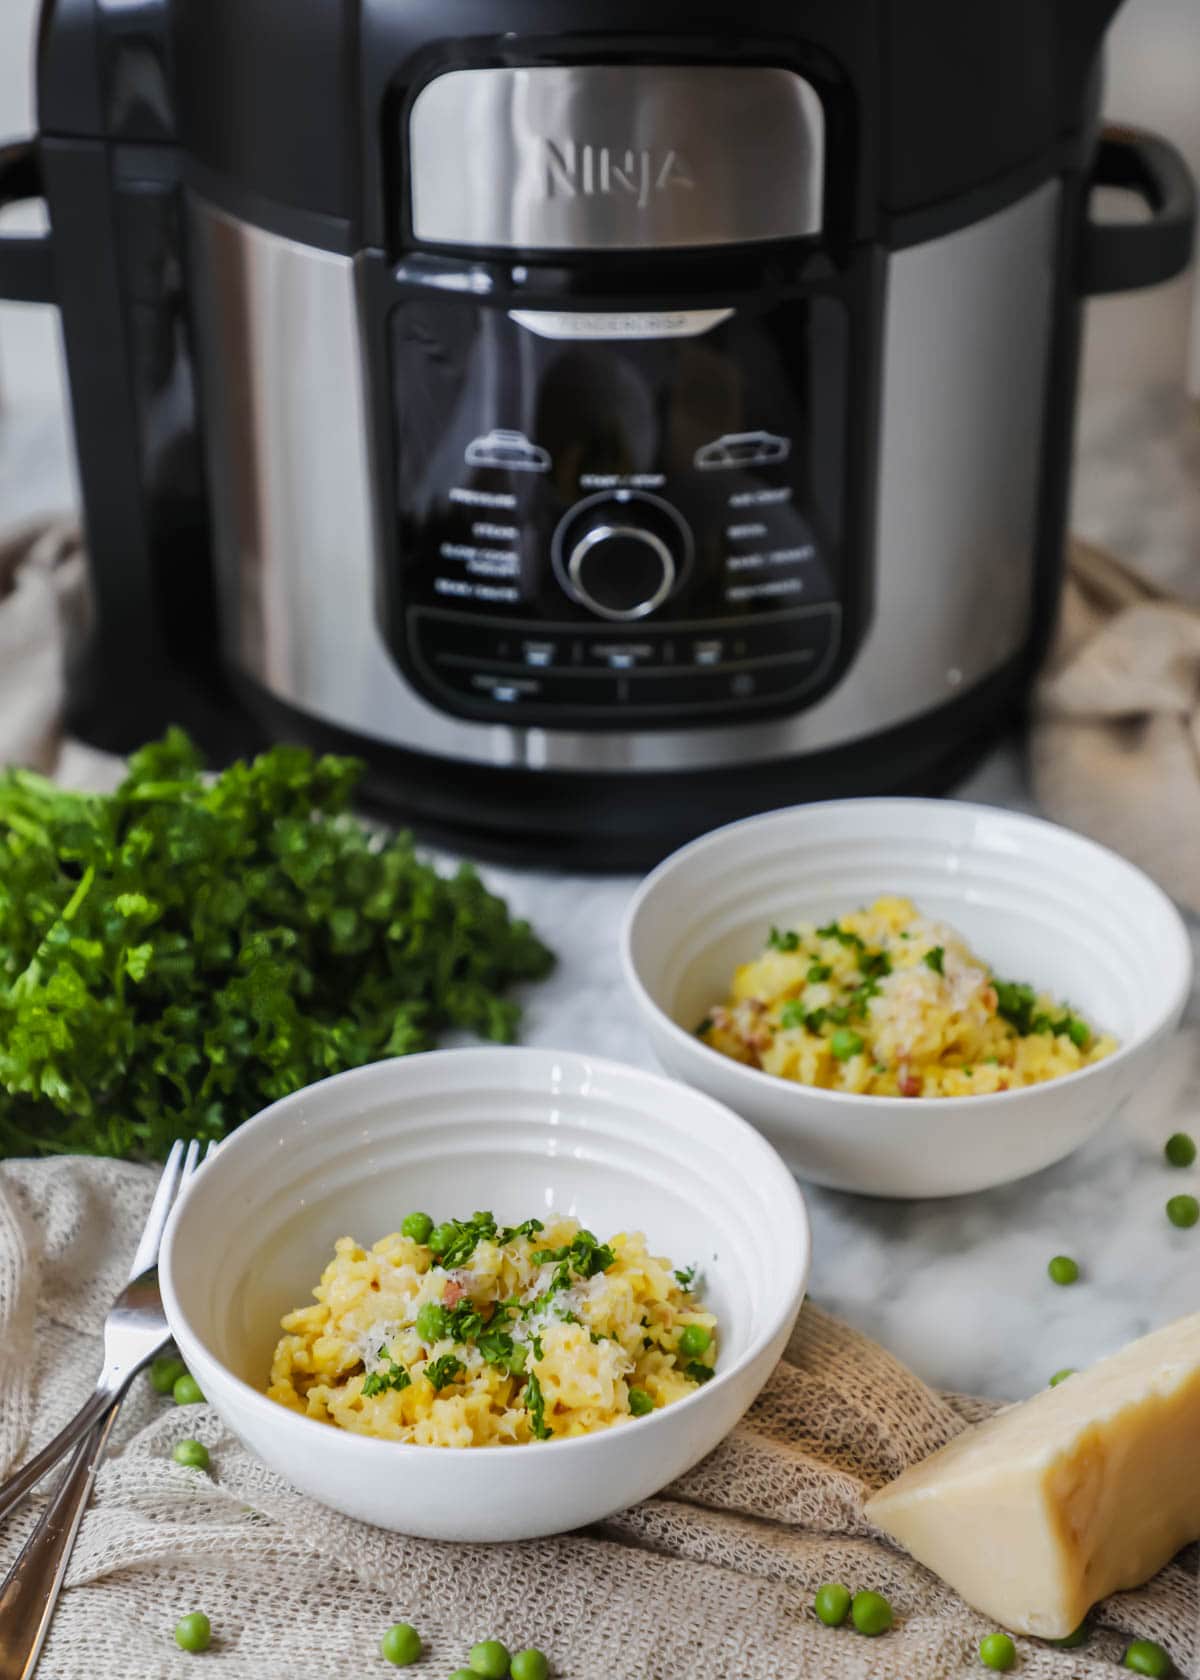 Instant Pot Risotto with Pancetta and Peas in bowls in front of Ninja Foodi instant pot.